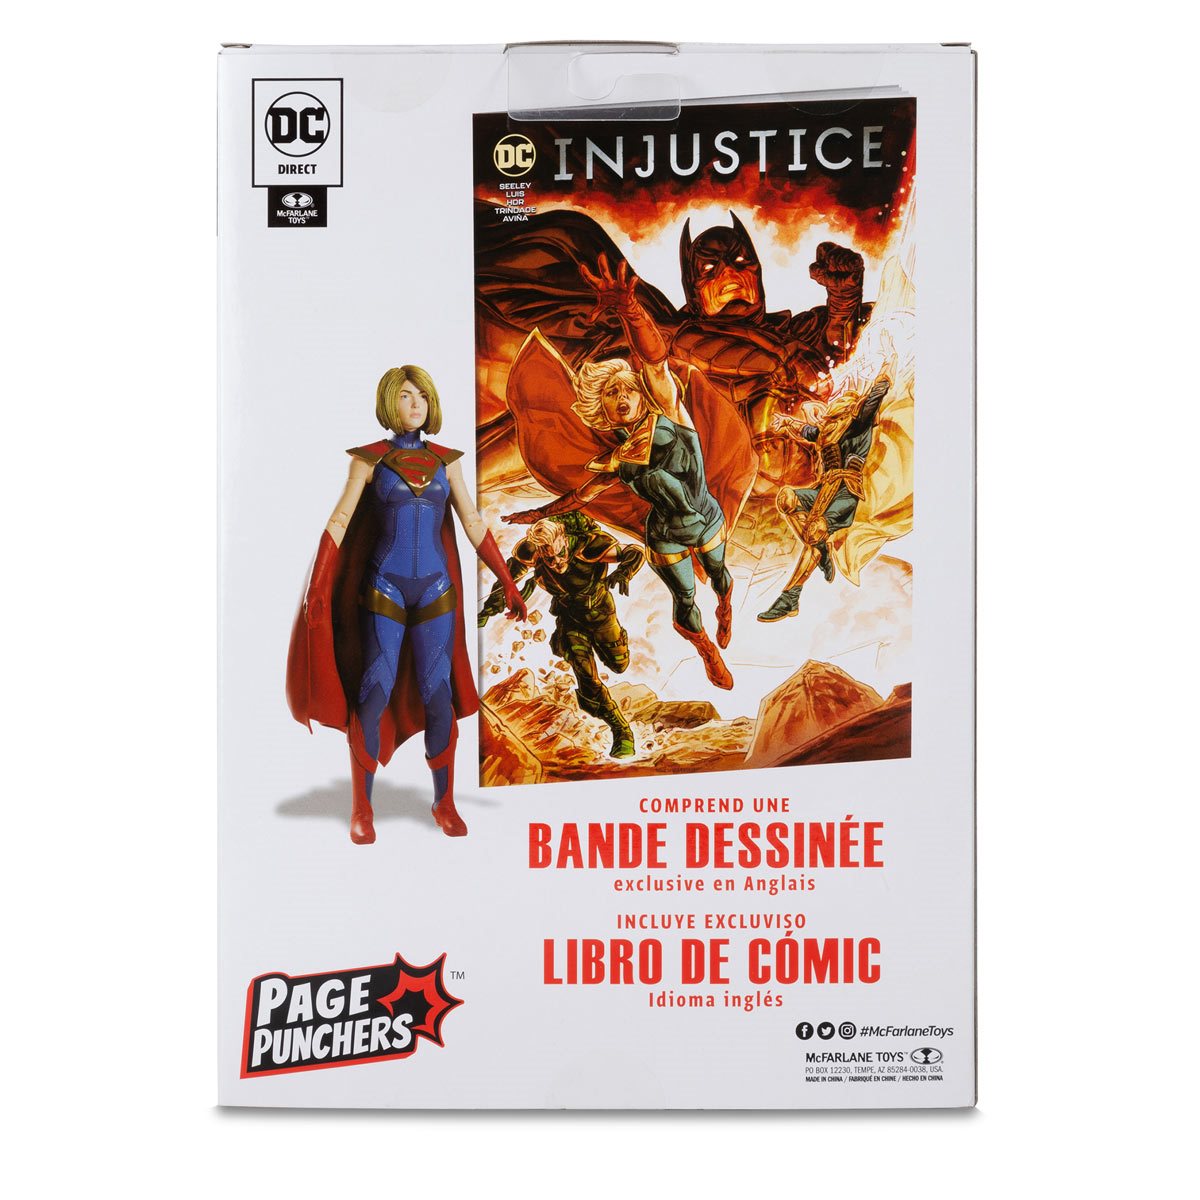 INJUSTICE 2 - Supergirl Action Figure Toy back view of the package - Heretoserveyou